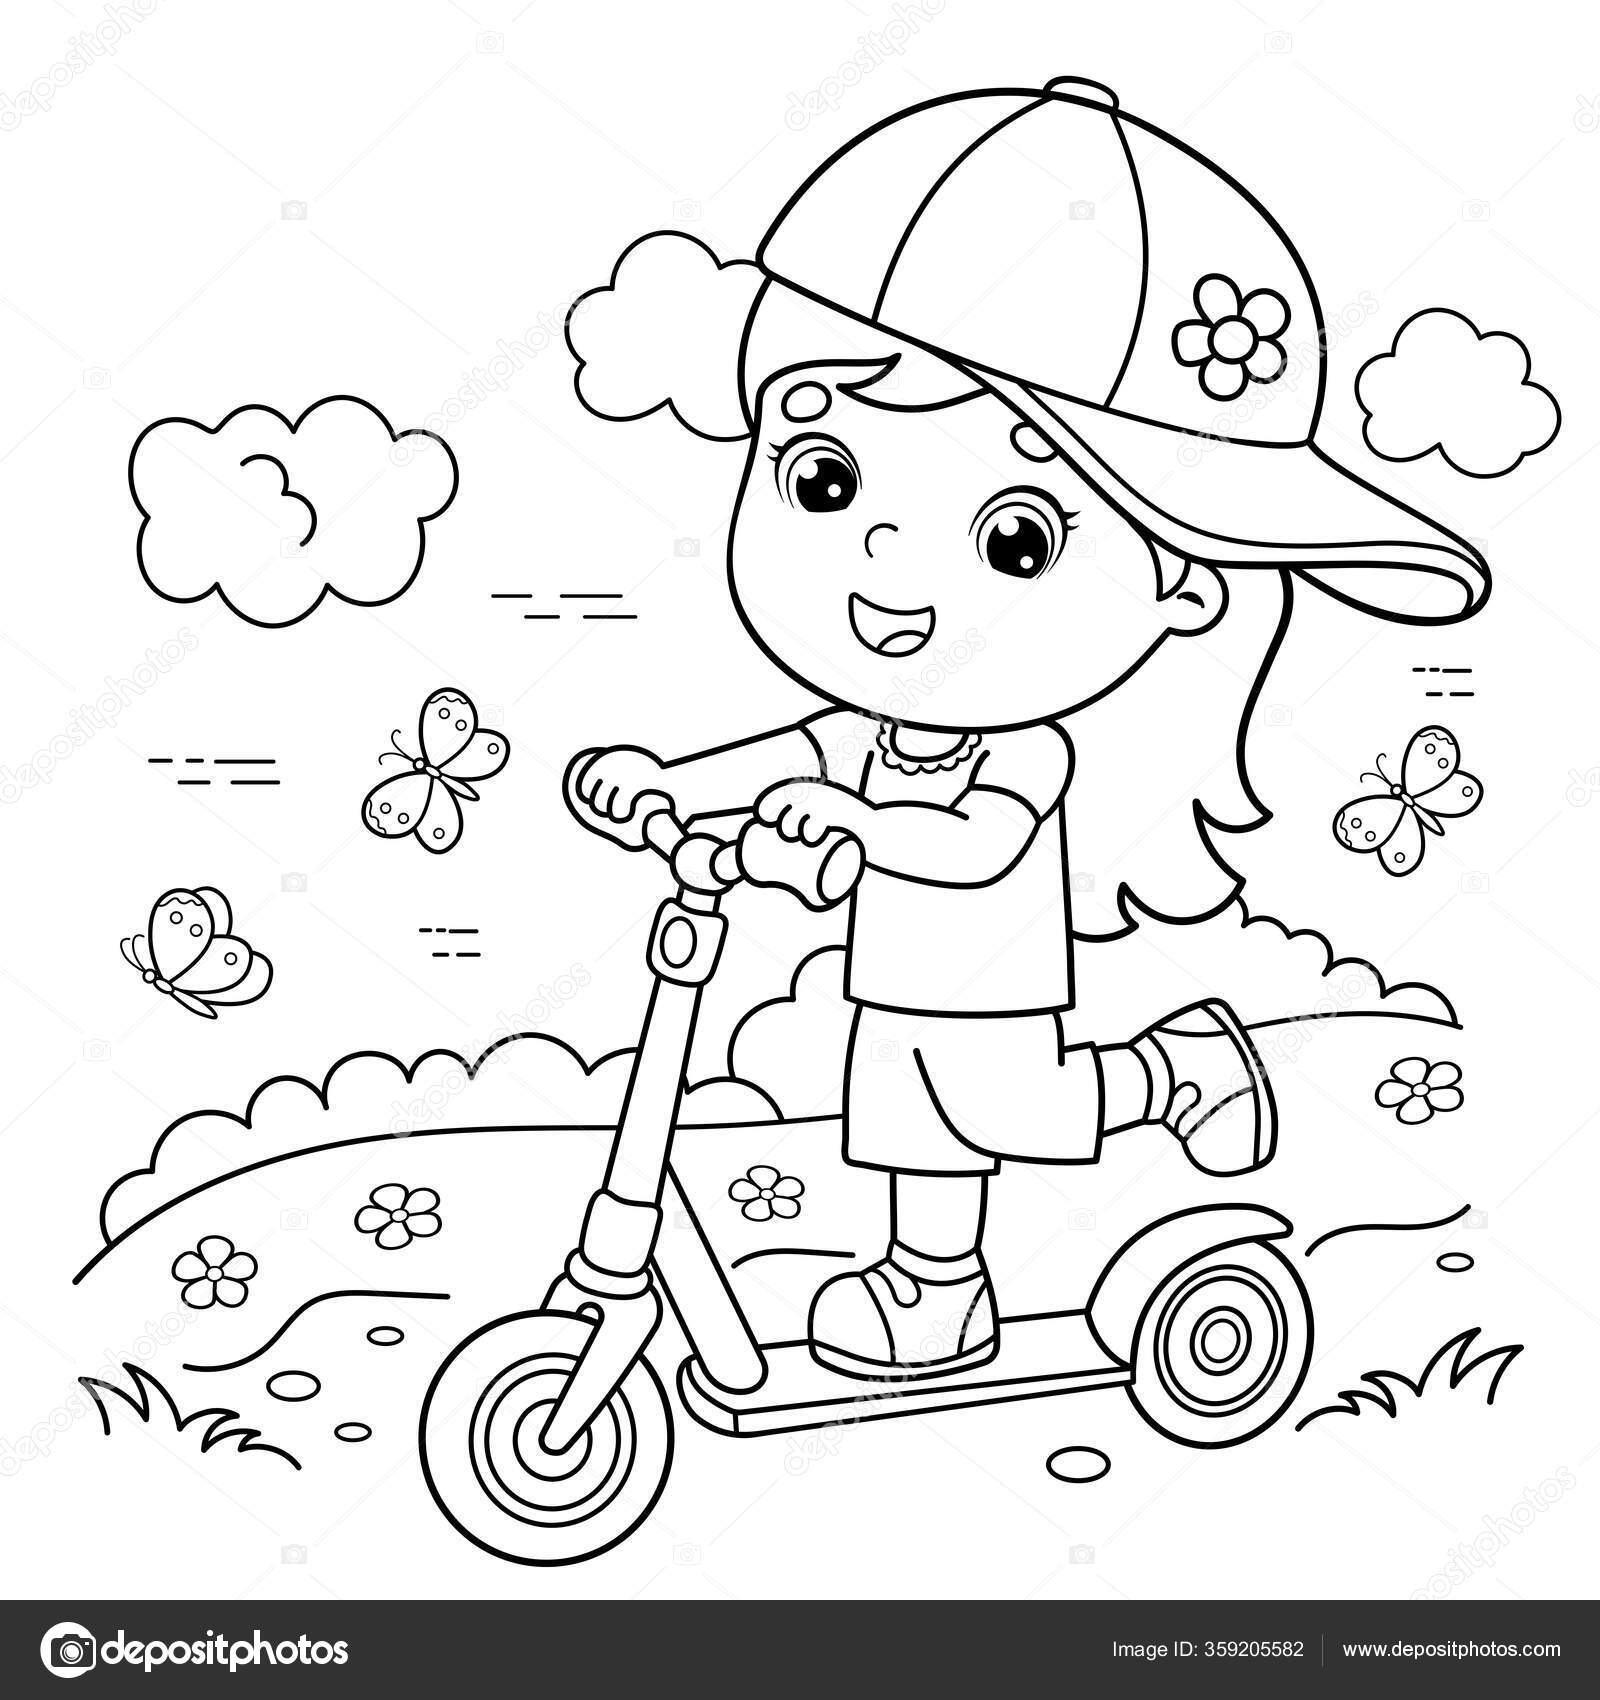 Coloring page outline cartoon girl scooter coloring book kids stock vector by oleon